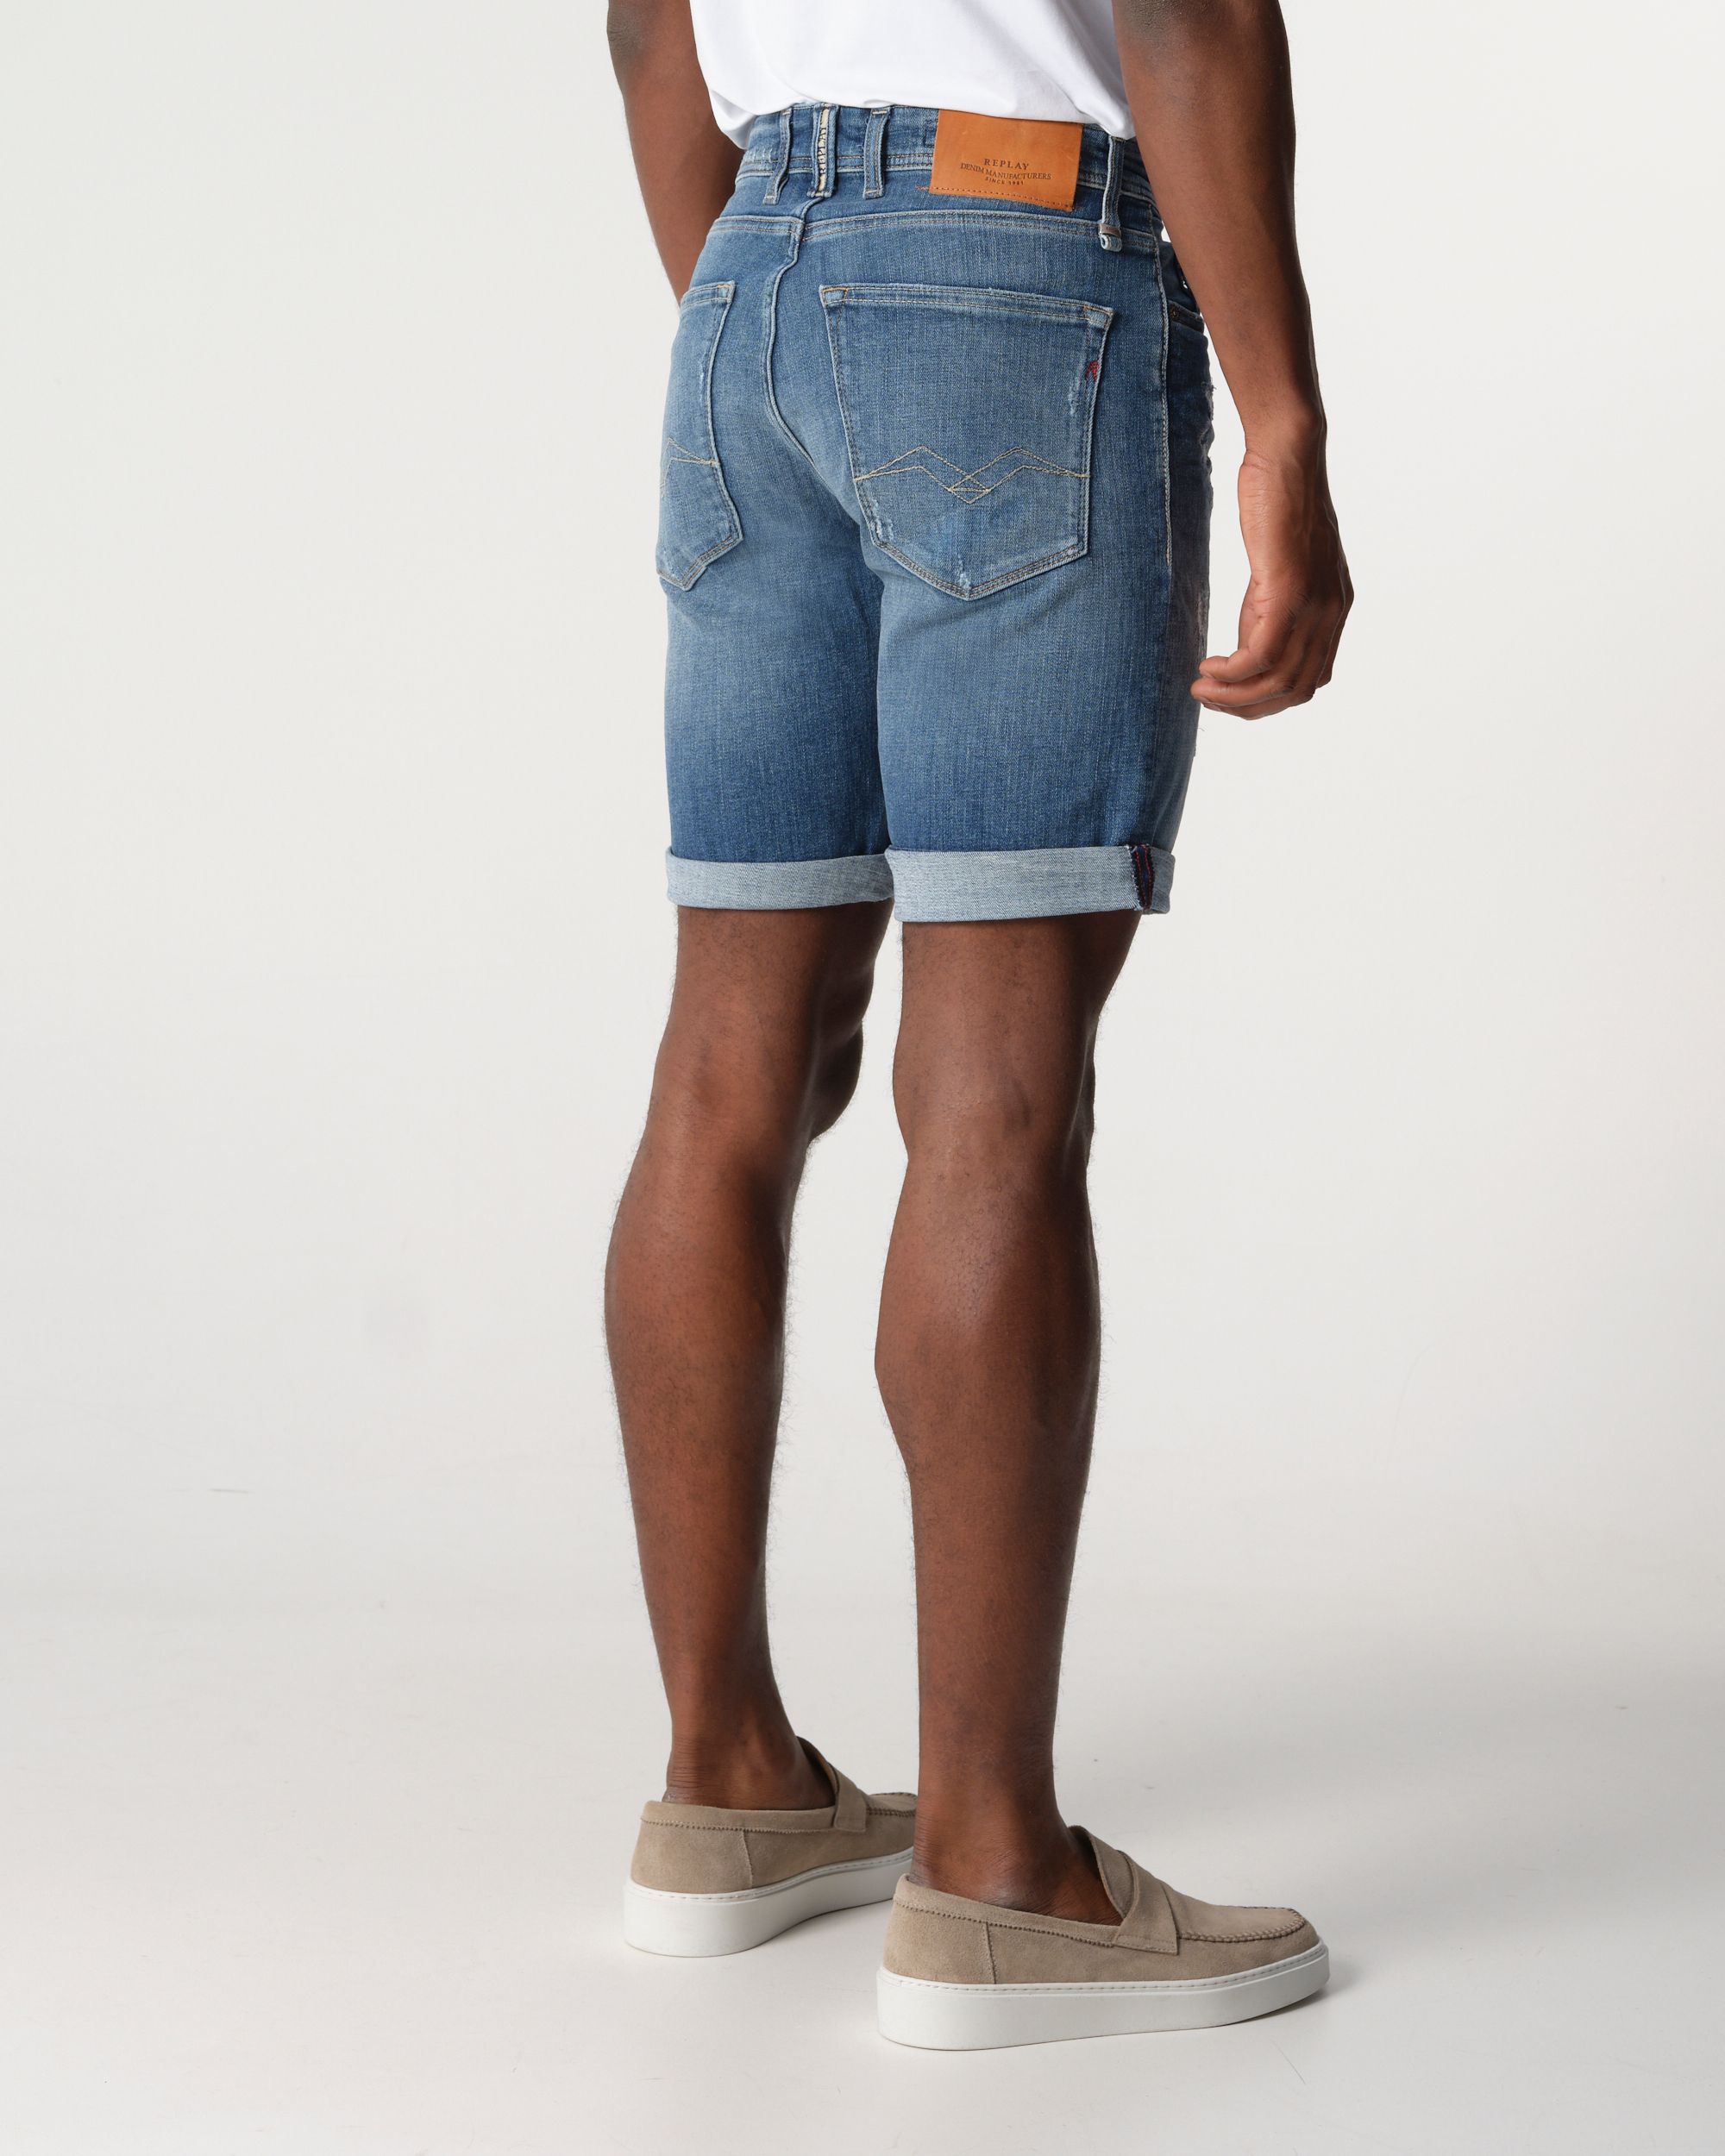 Replay RBJ.981 Aged-Destroyed Short Blauw 094368-001-29